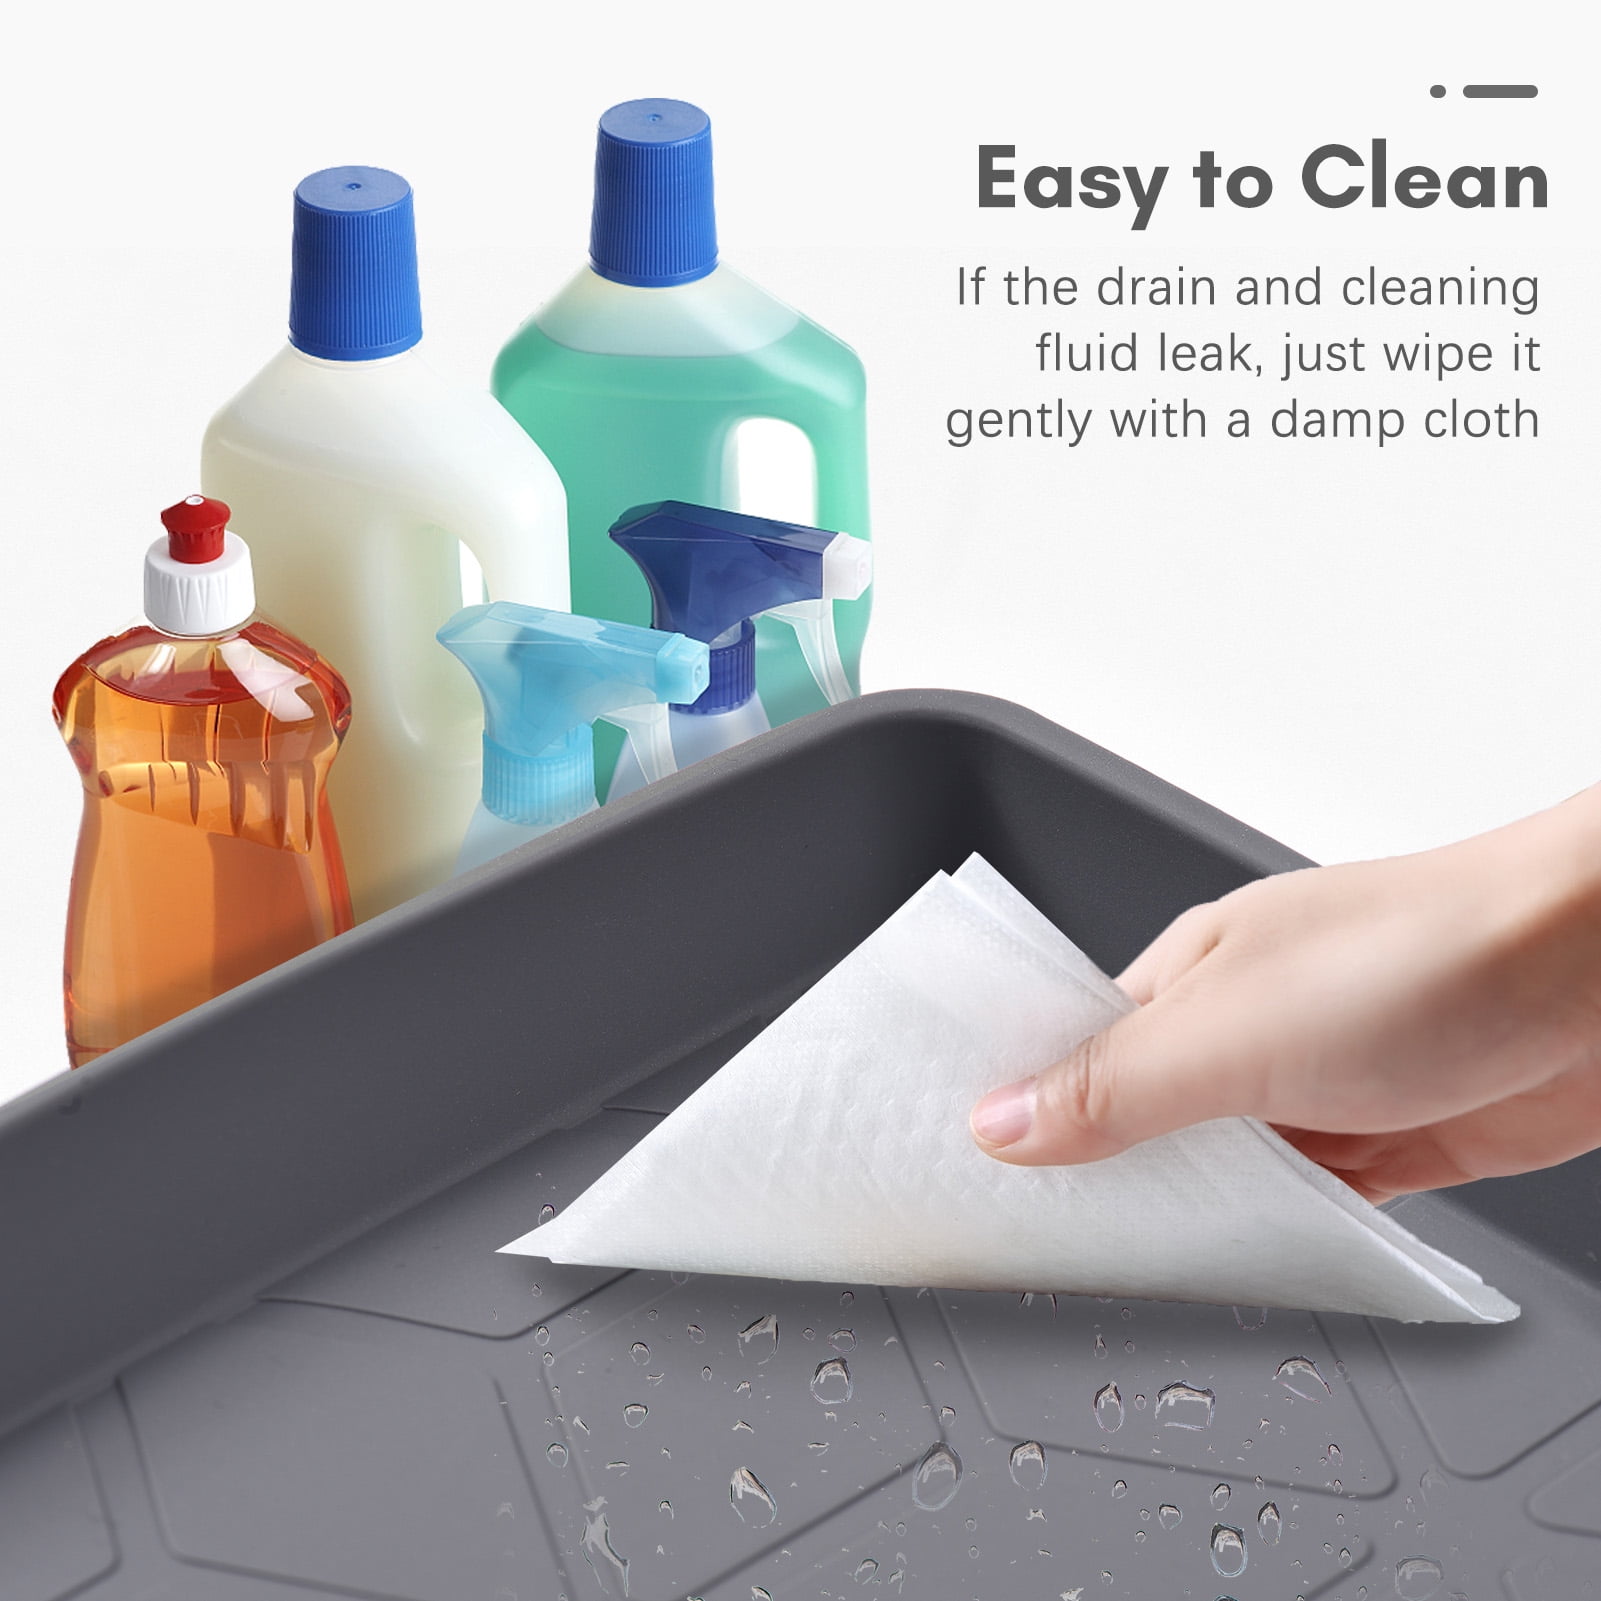 Hommii Waterproof Under Sink Mat for Kitchen - 34 x 22 Inches Adjustable Silicone Bathroom Sink Mat with Drain Hole, Under Sink Drip Tray for